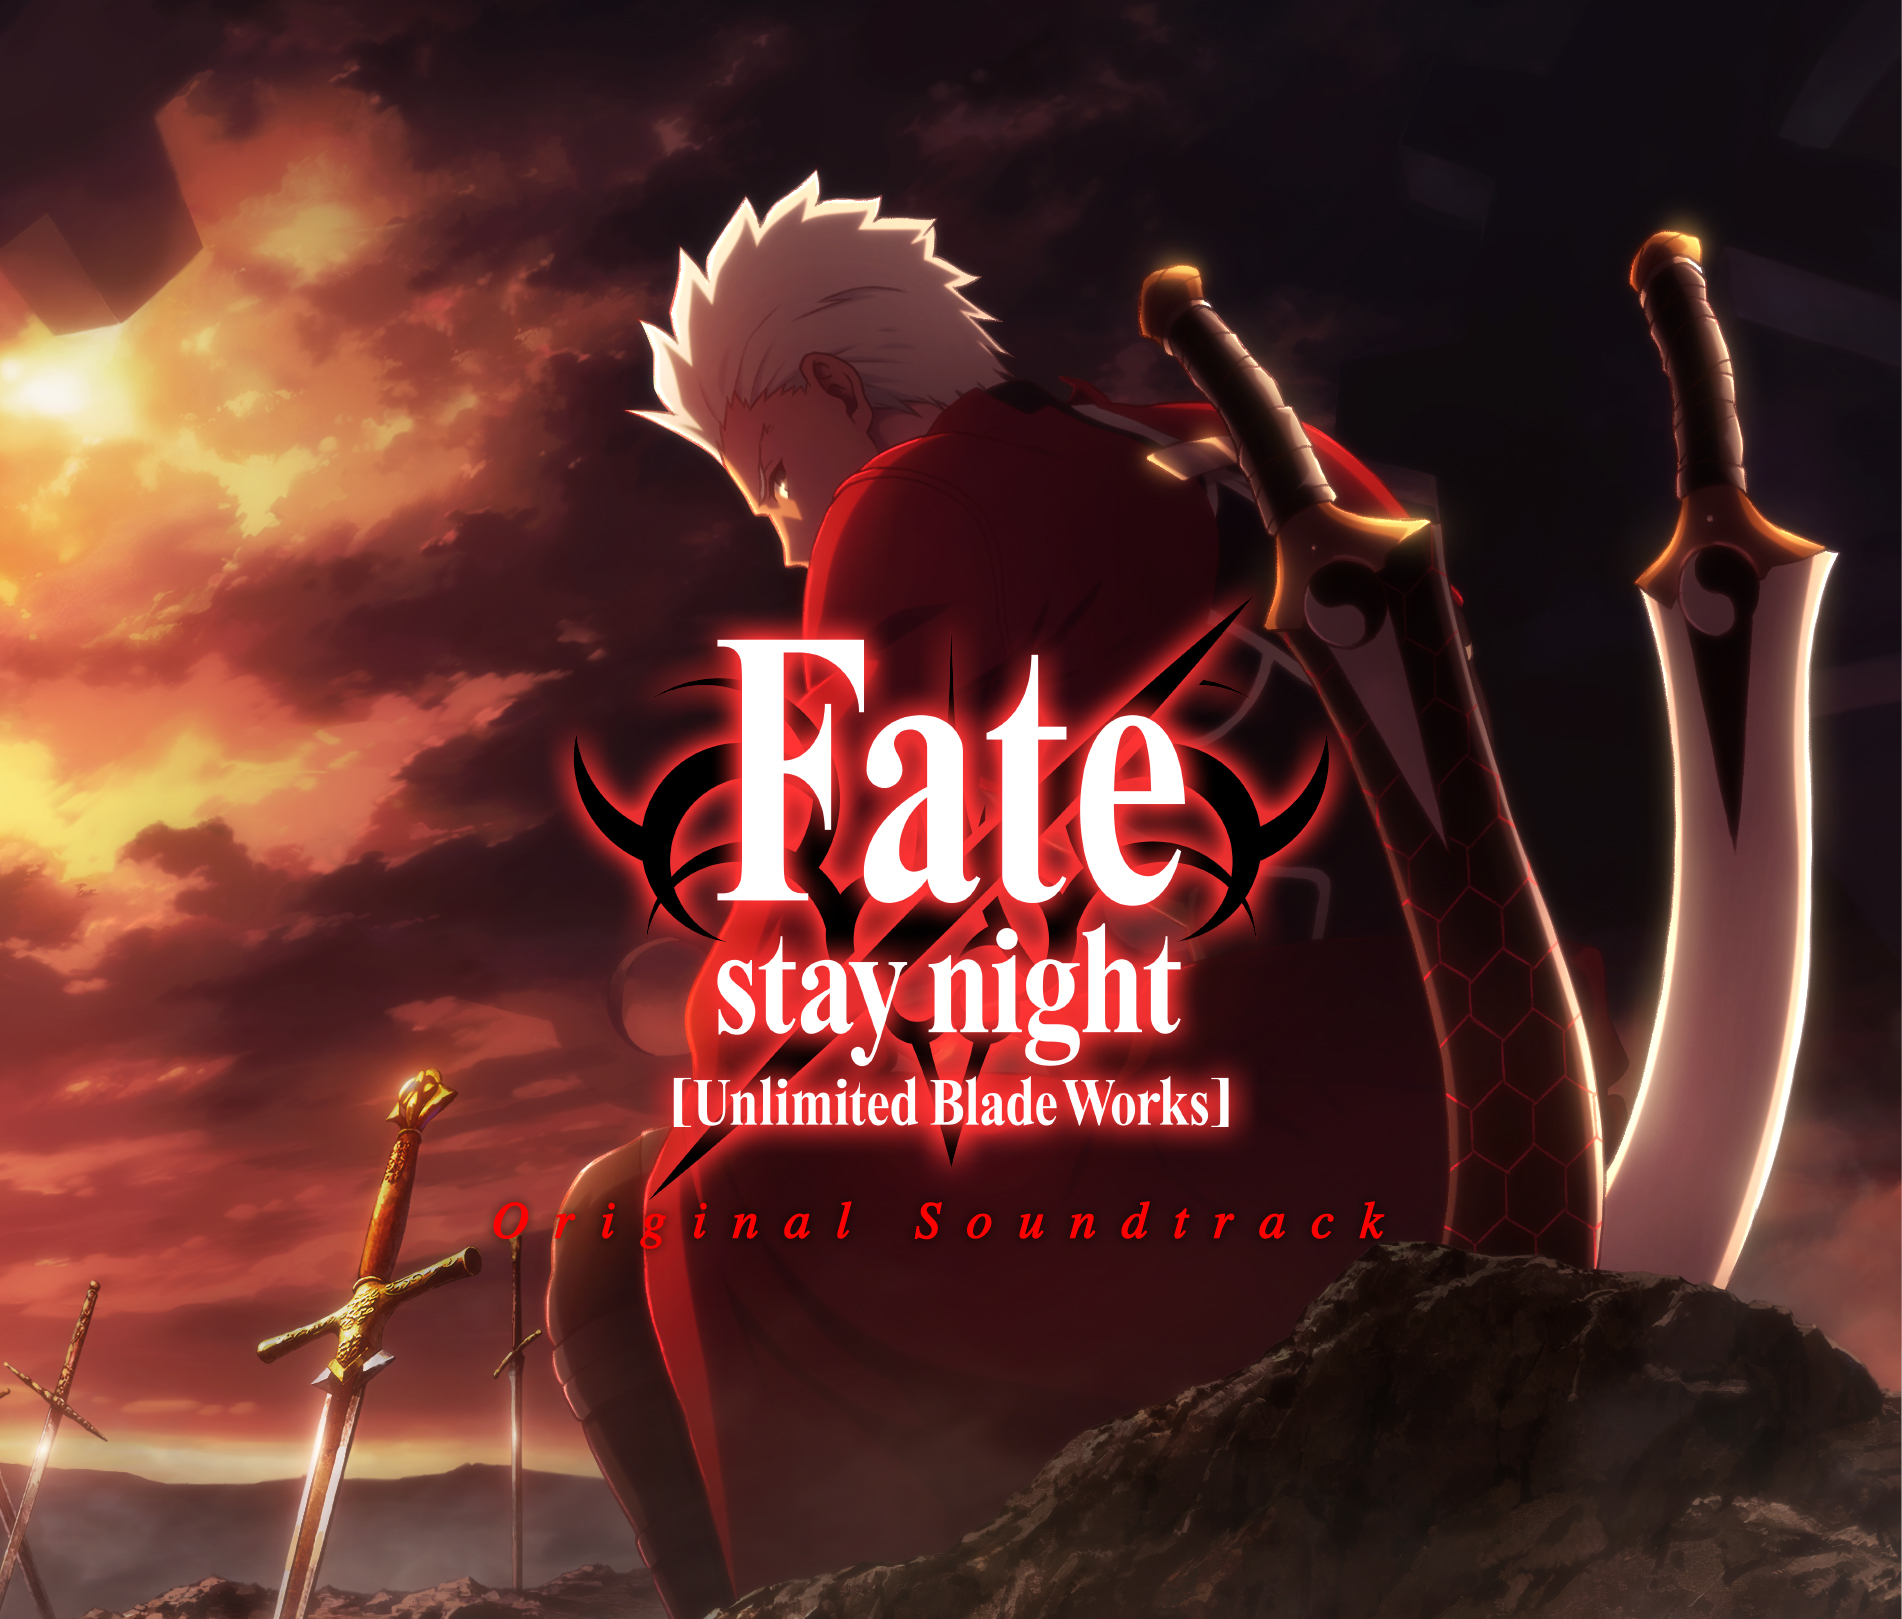 Fate/stay night [Unlimited Blade Works]』Original Soundtrackの